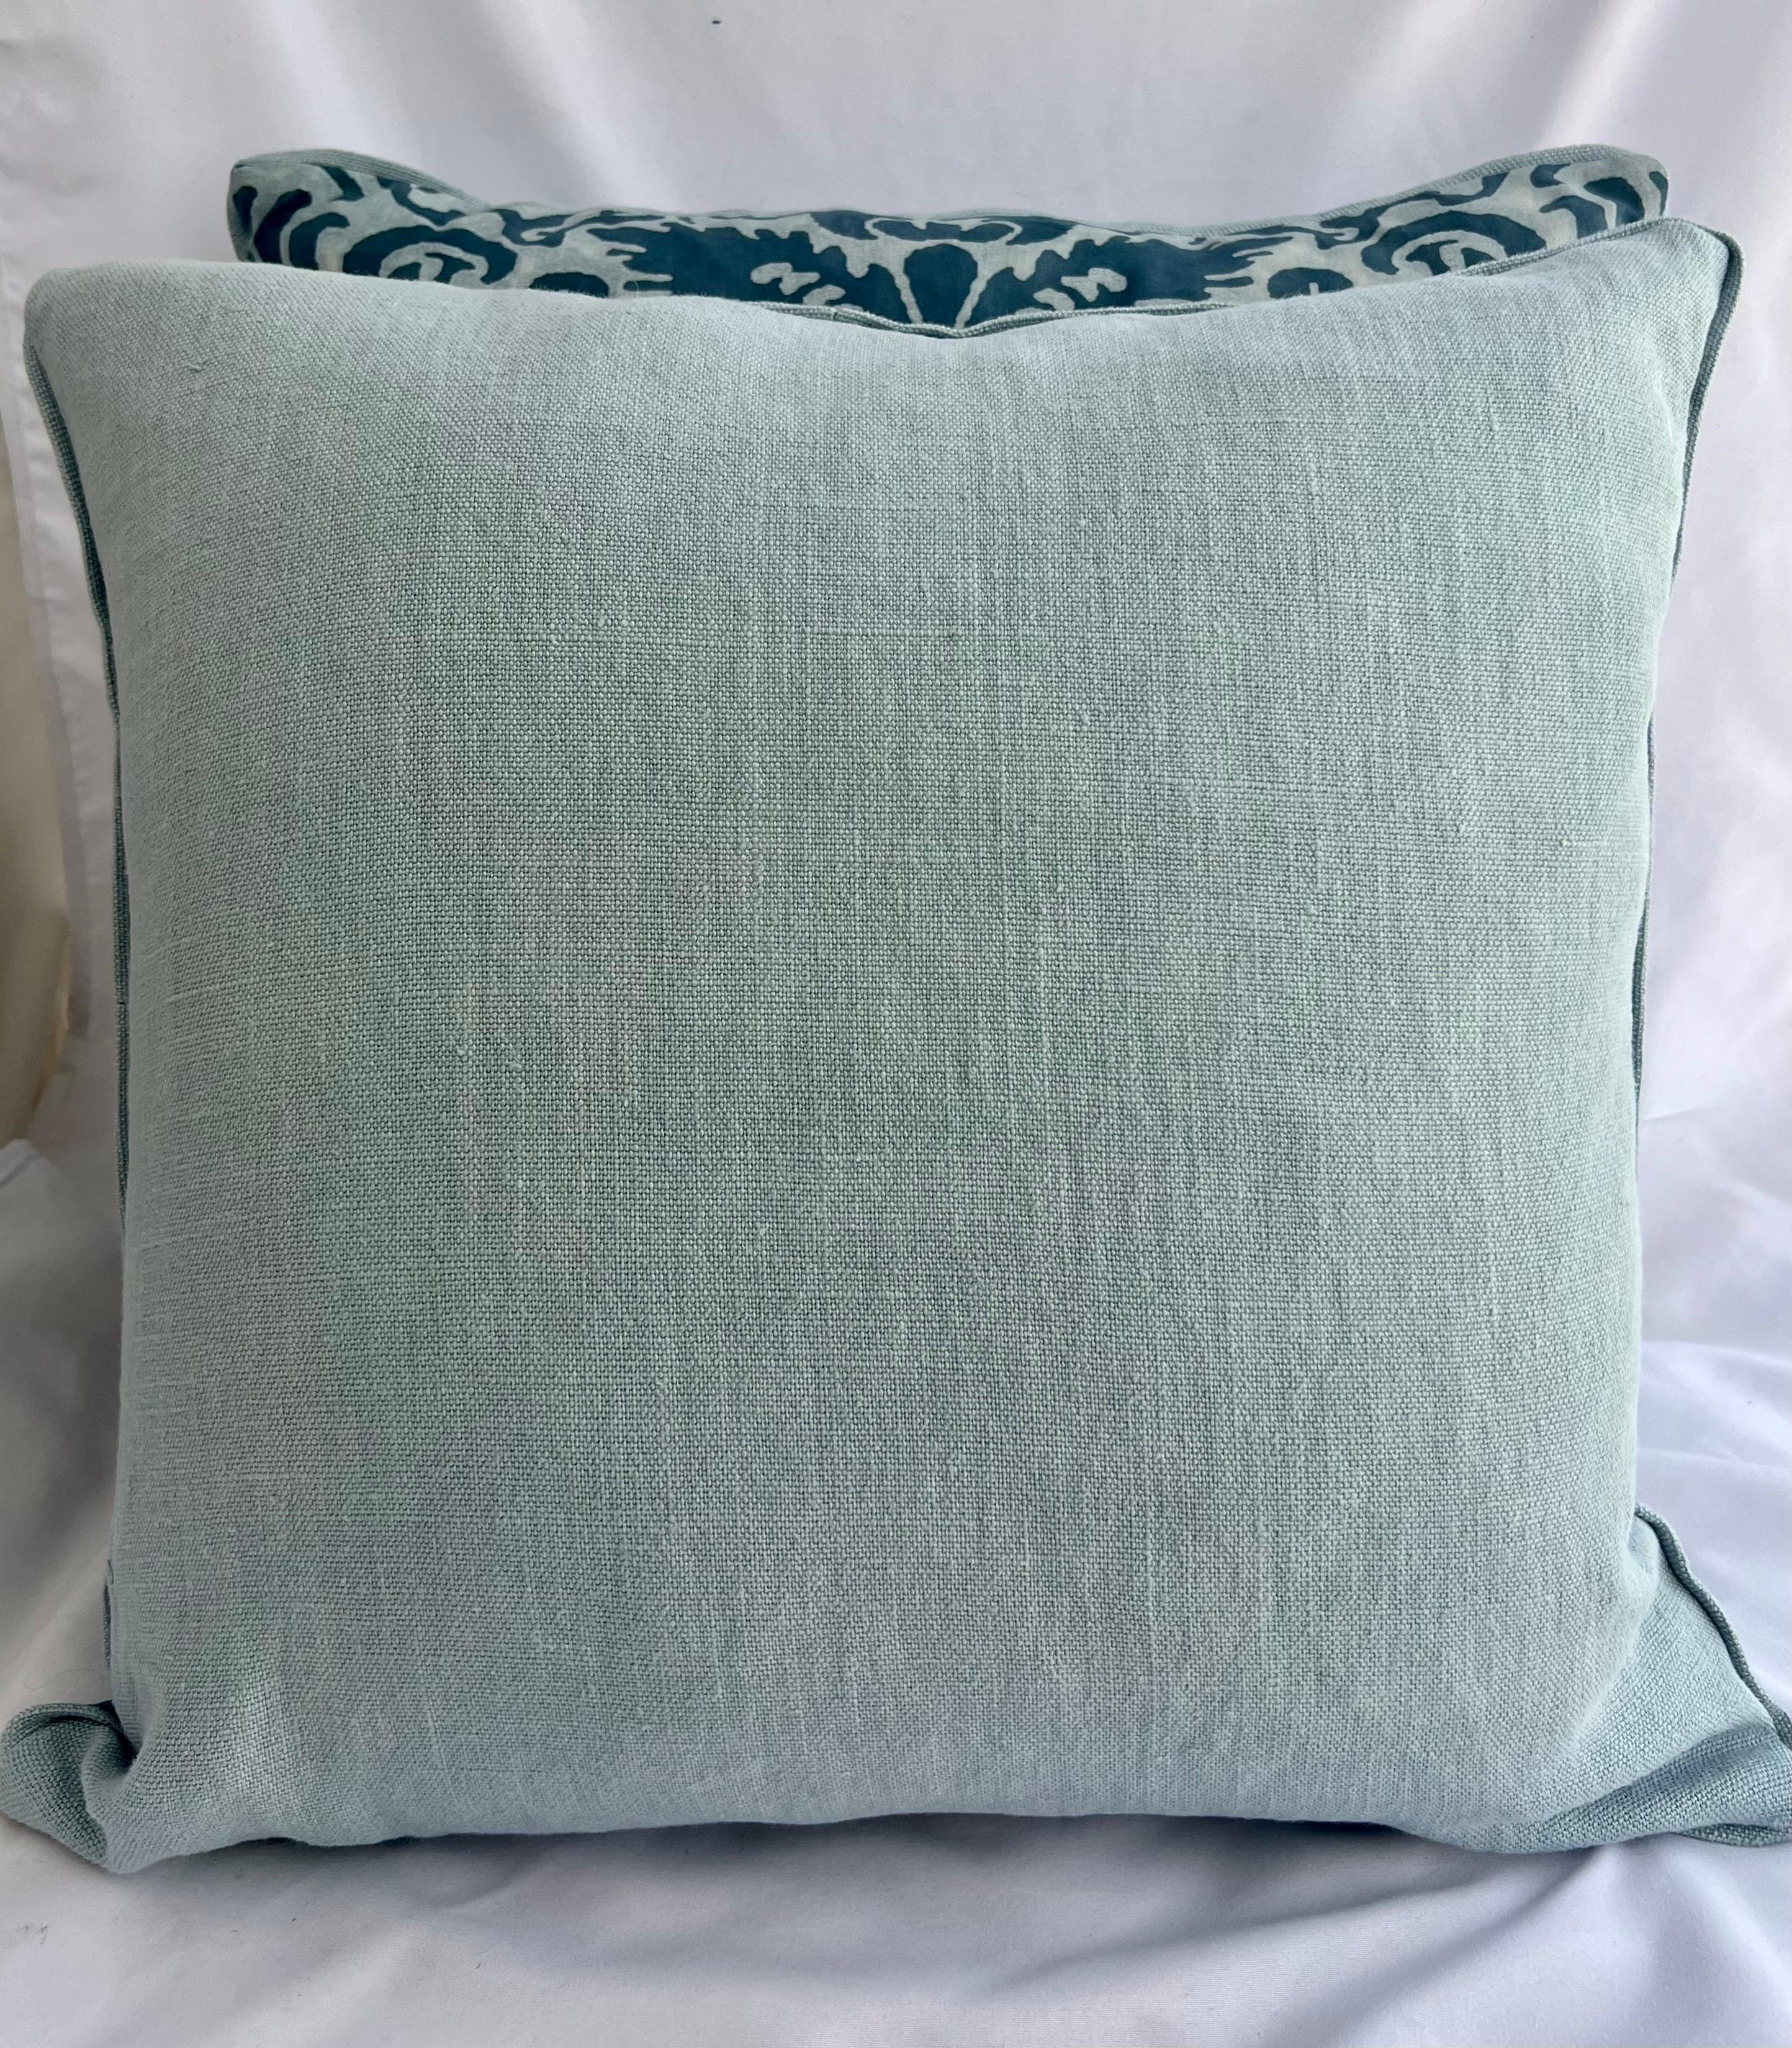 Pair of Unique Blue Caravaggio Fortuny Patterned Pillows  In Excellent Condition For Sale In Los Angeles, CA